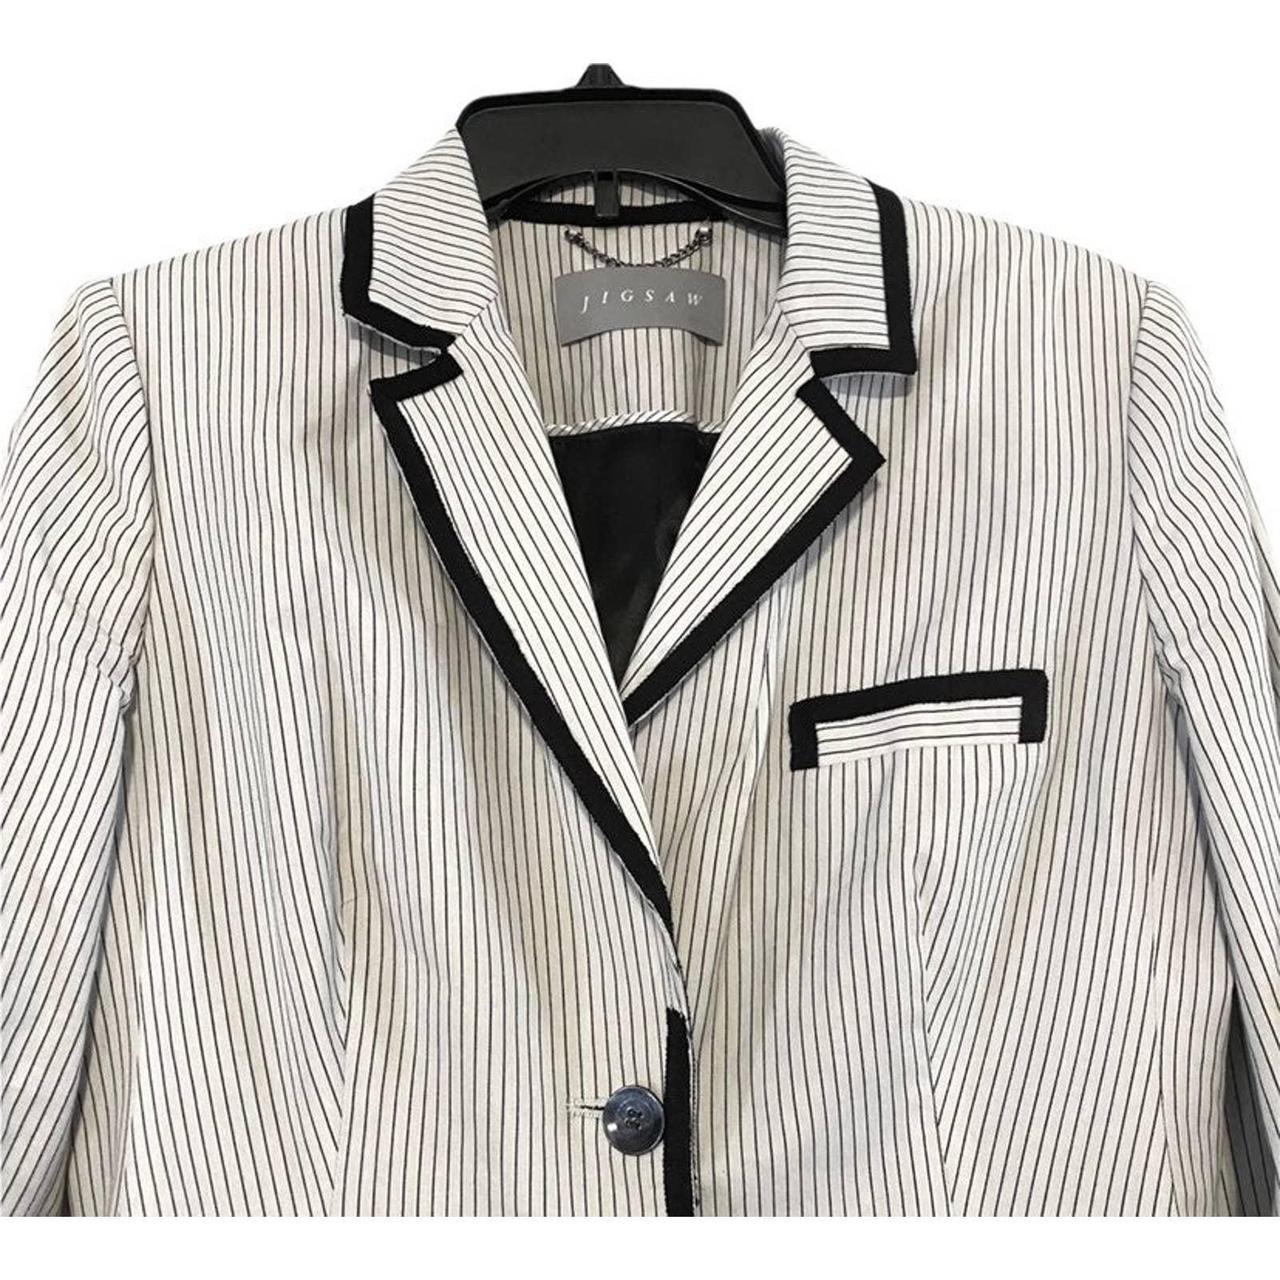 Product Image 4 - This is a suit jacket